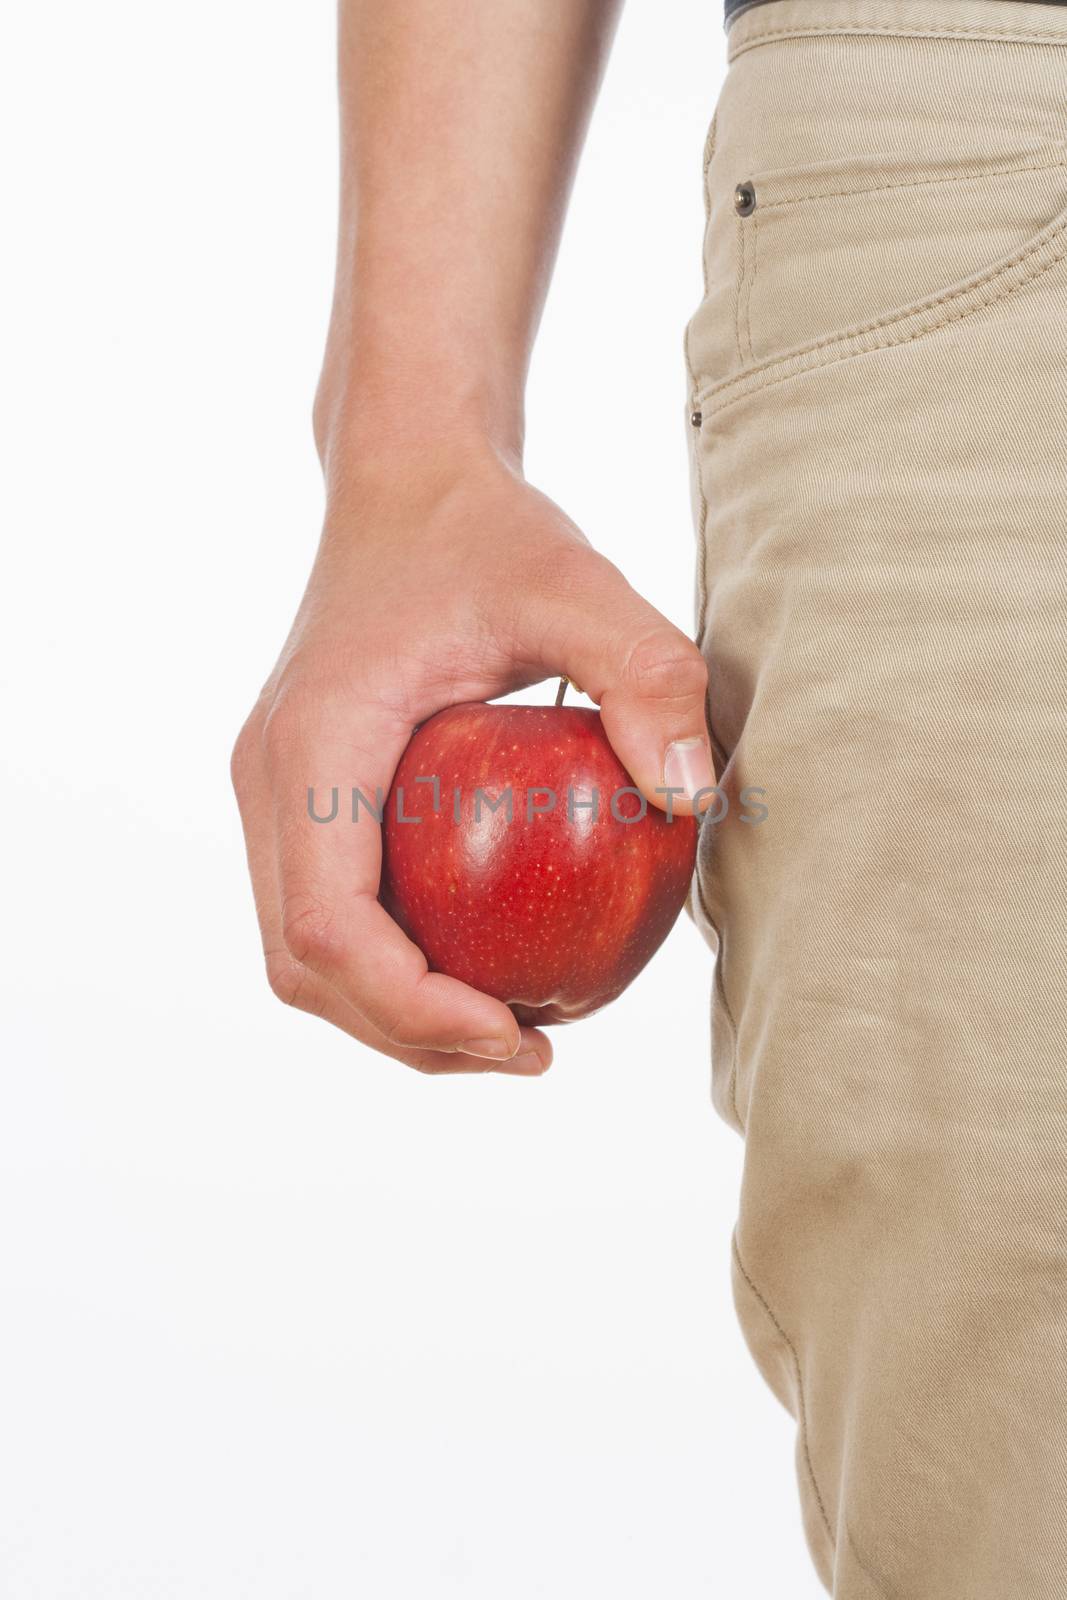 Hand Holding Red Apple Against White Background by courtyardpix